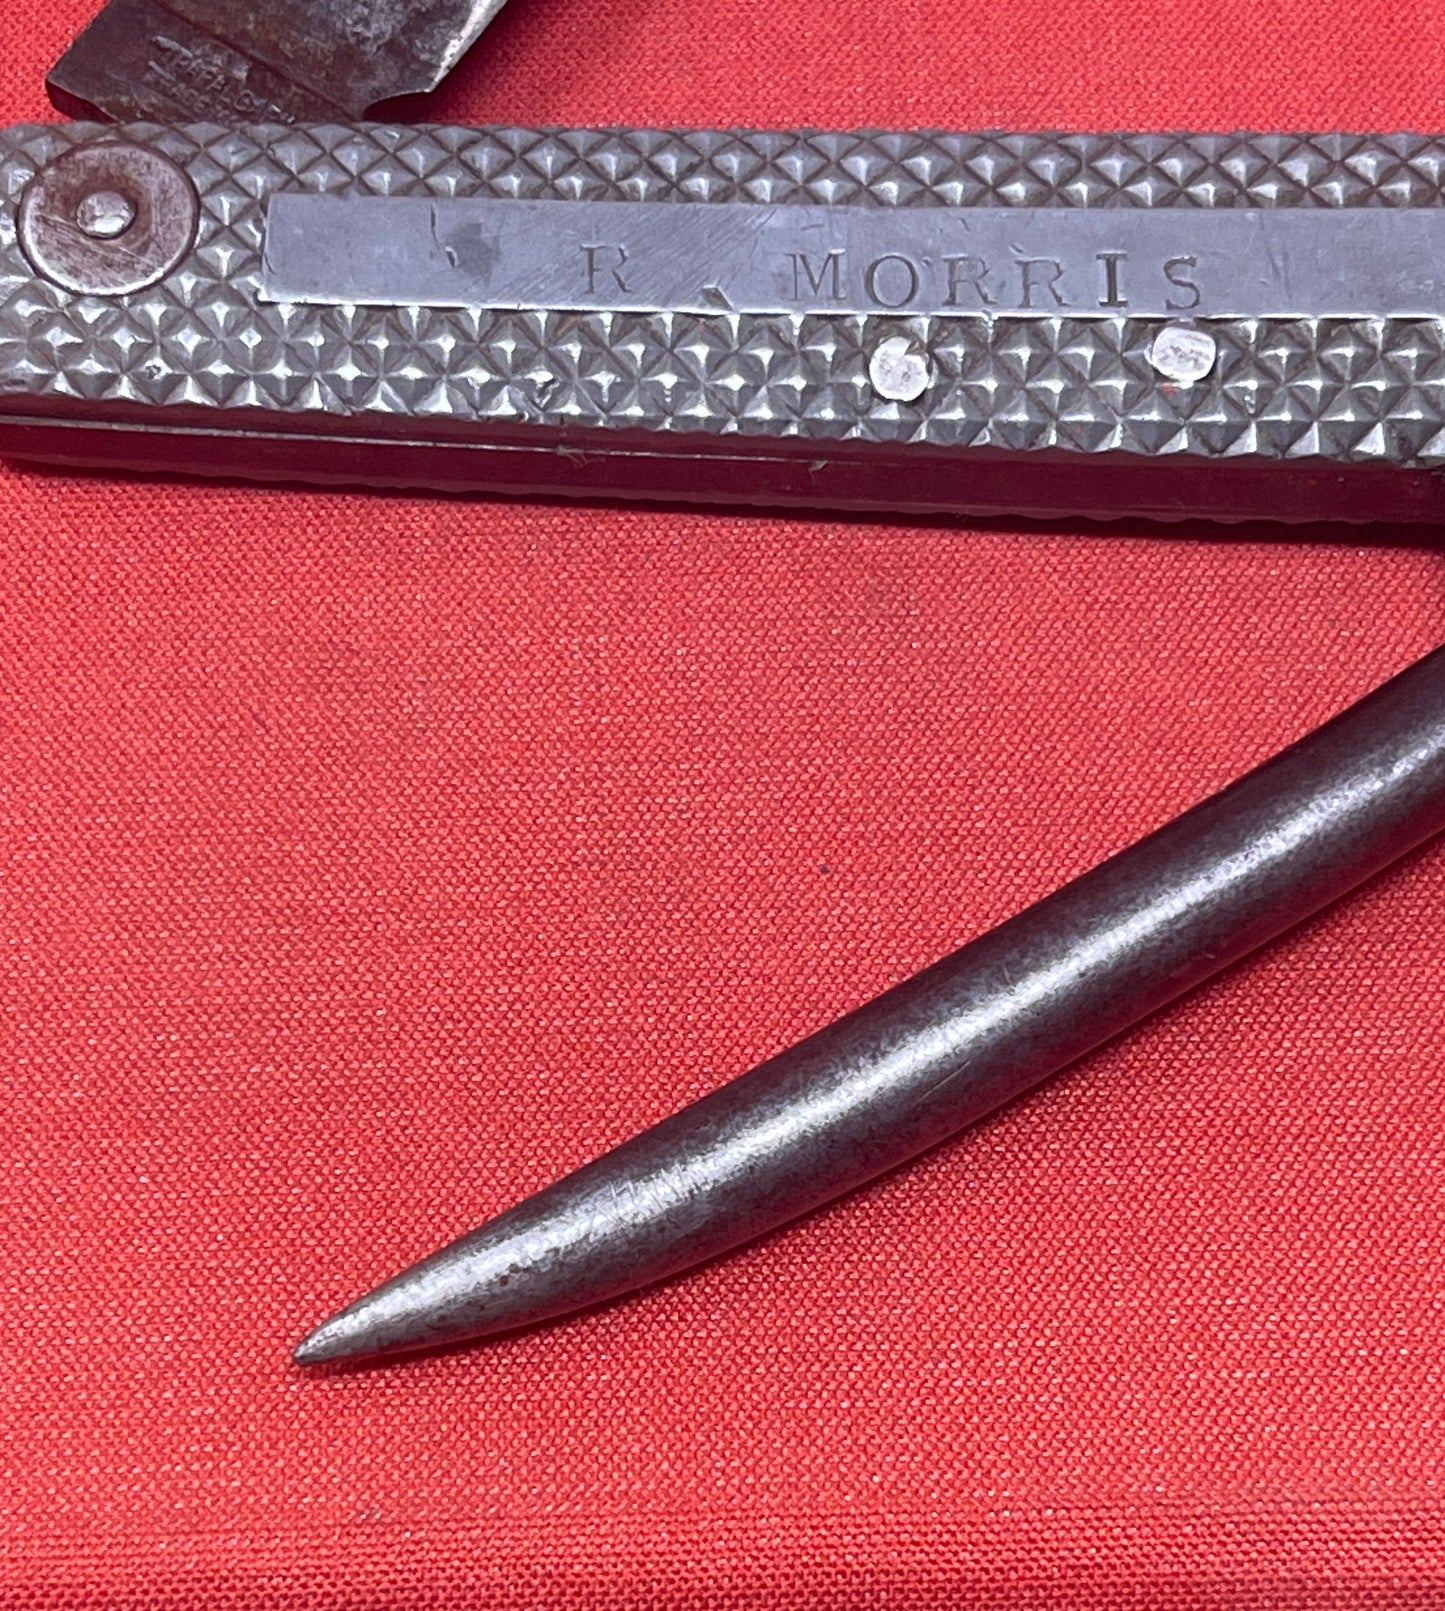 Royal Navy clasp knife, Admiralty Pattern 301